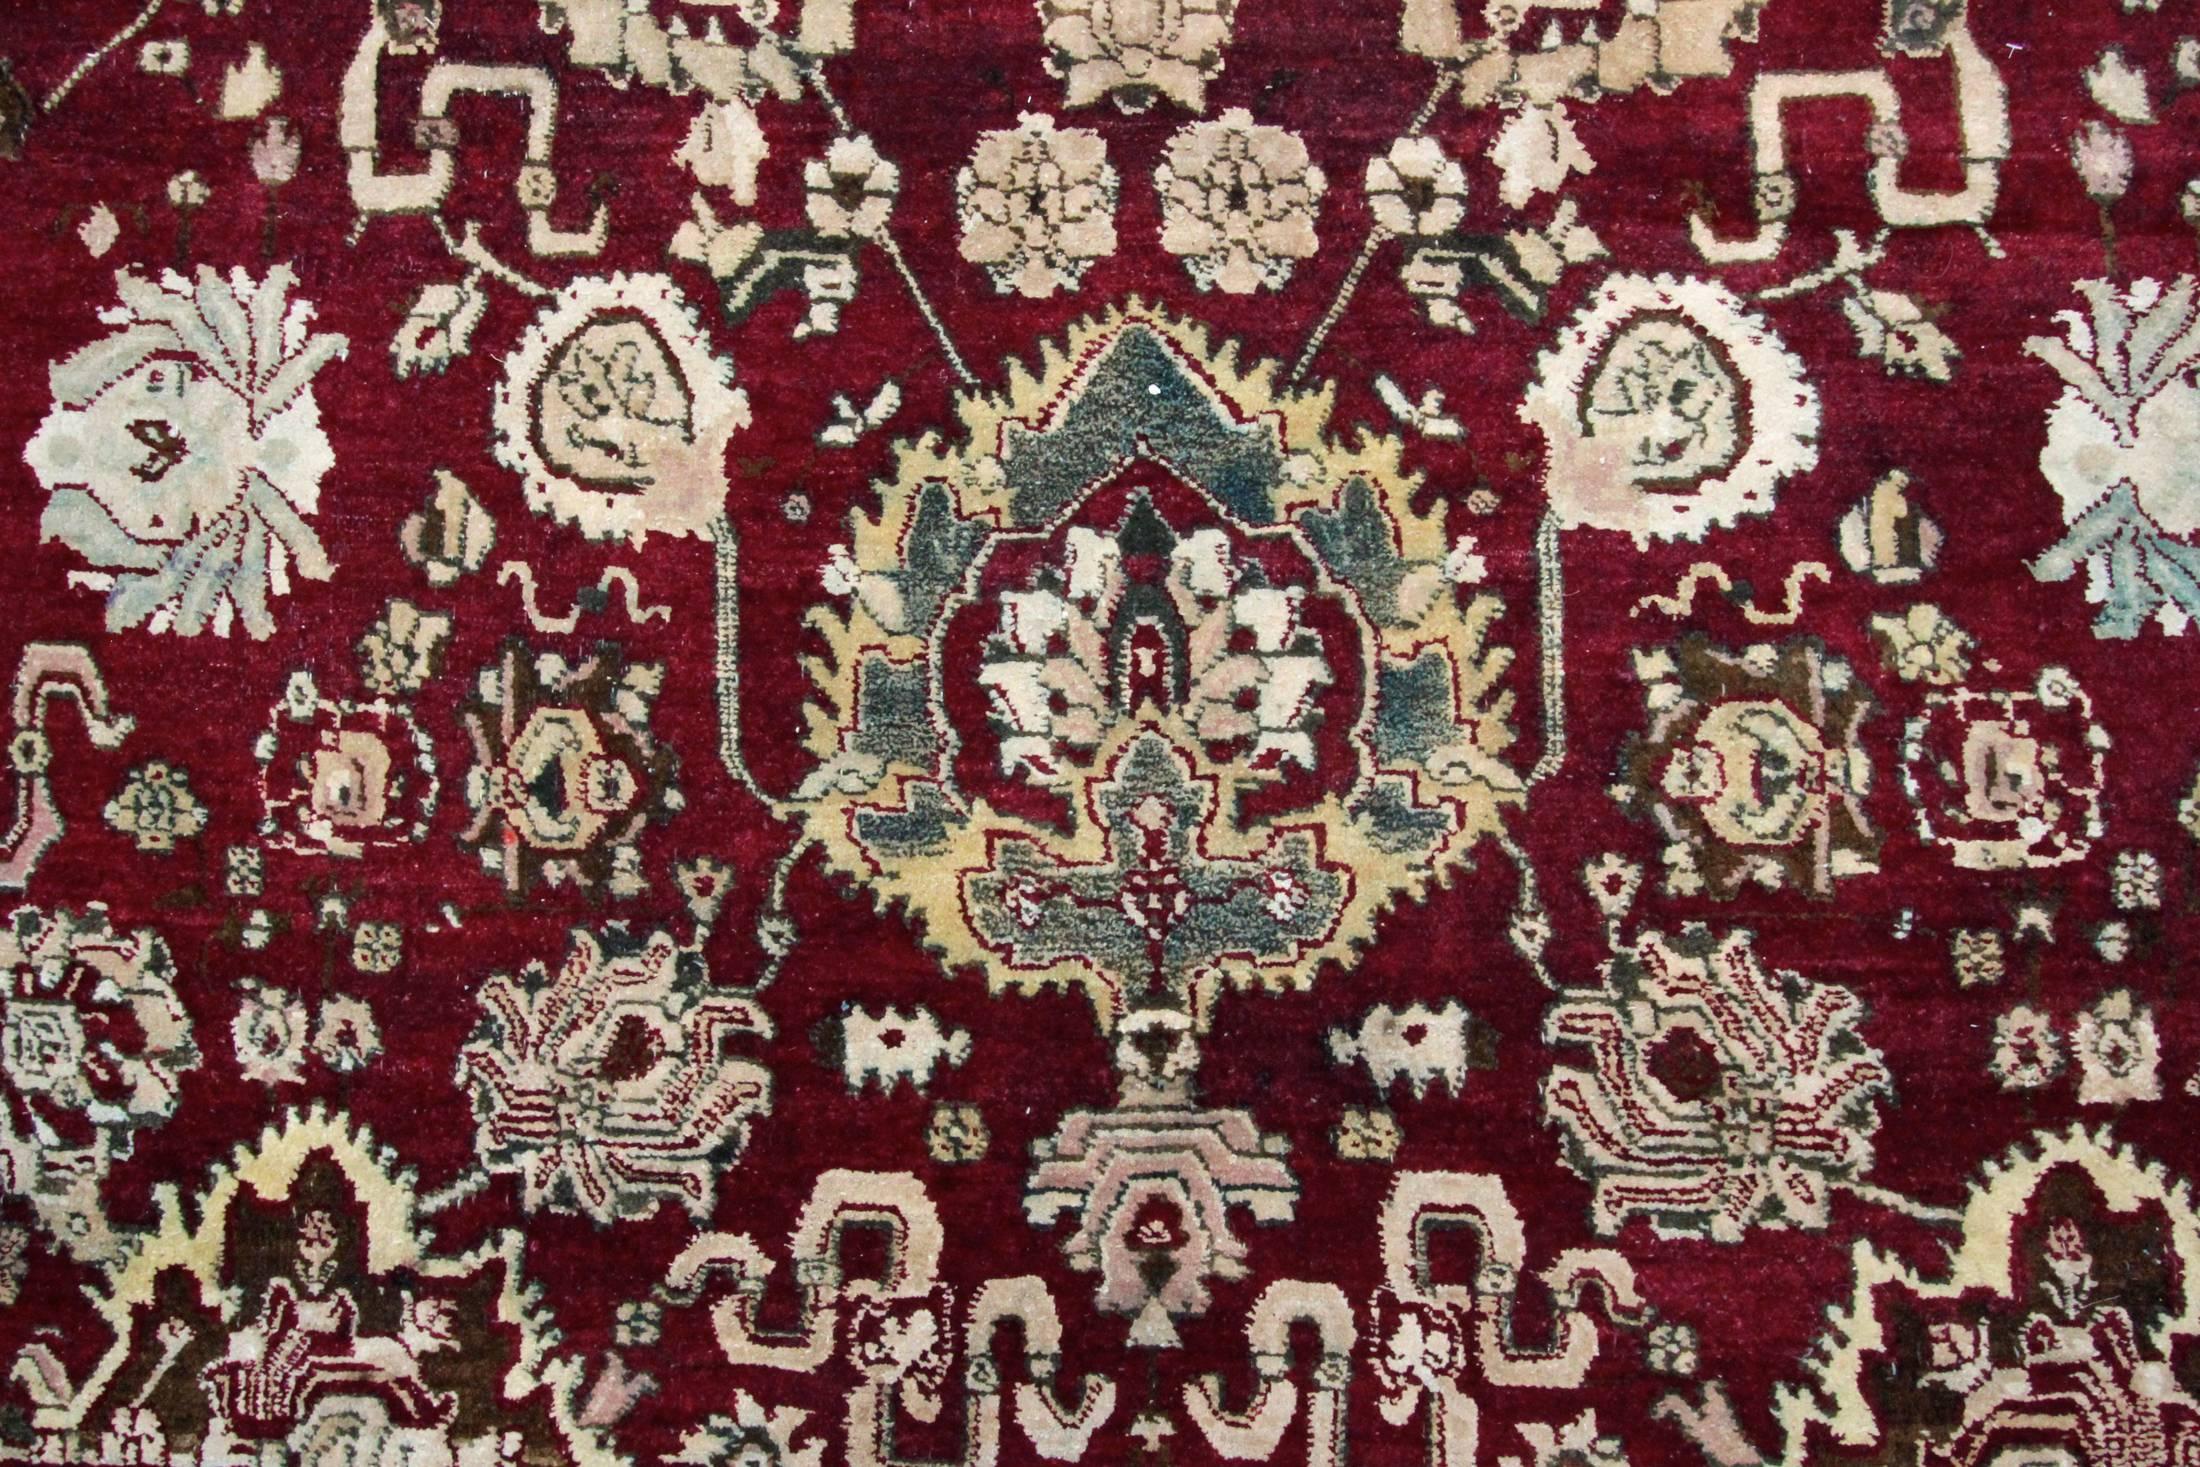 Hand-Woven Antique Agra Carpet For Sale